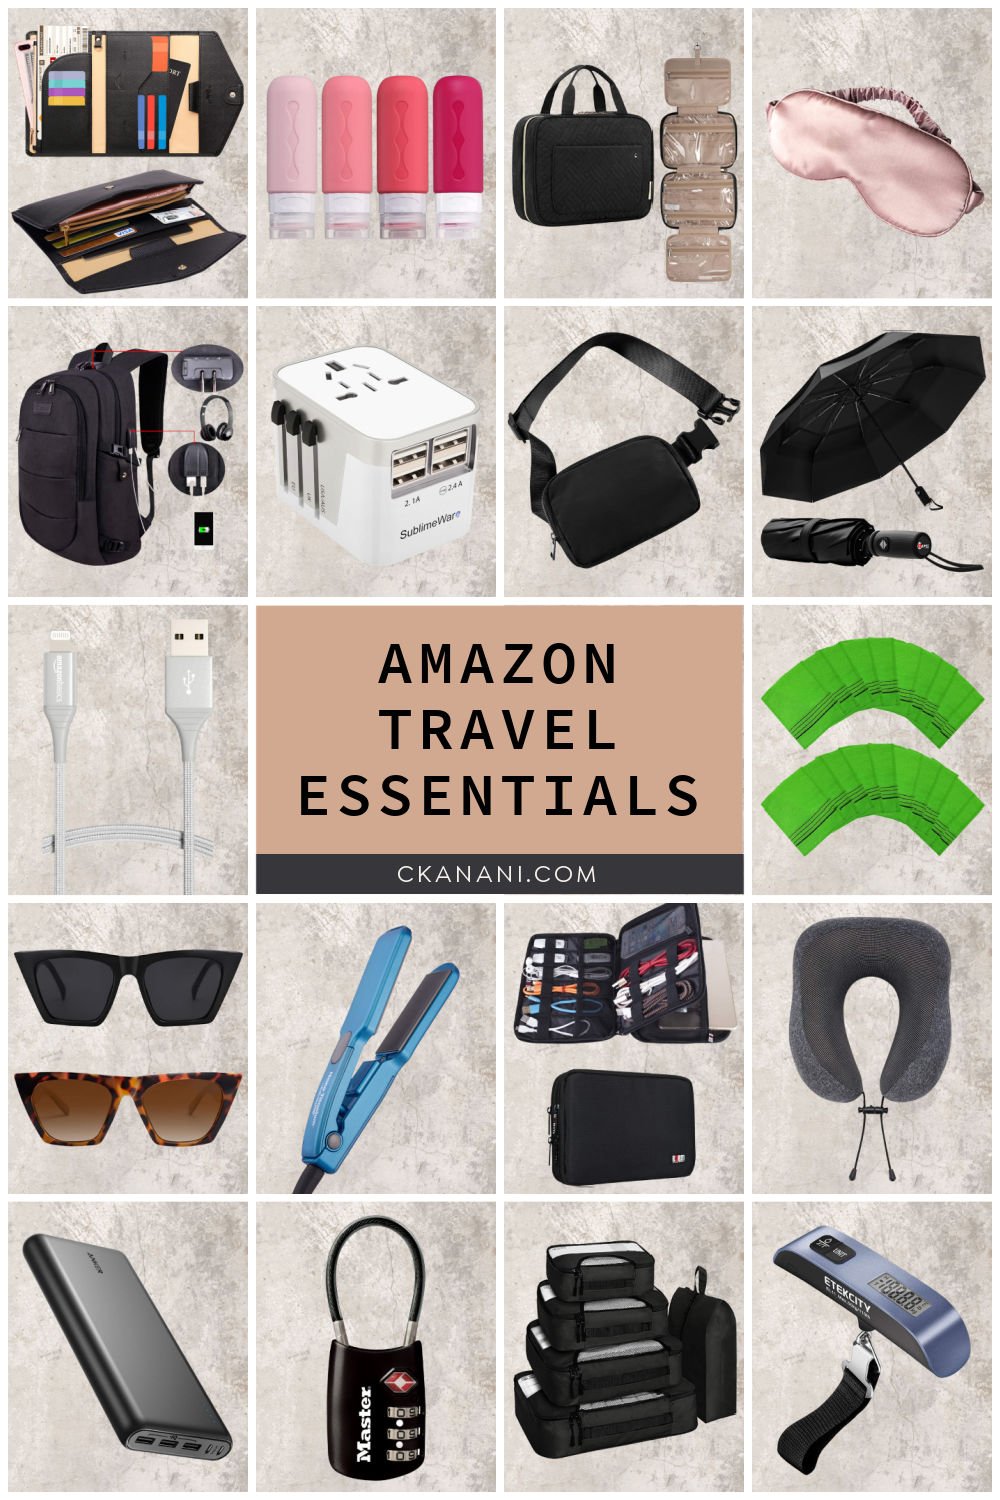 The best Amazon products for travel! Amazon travel essentials, Amazon products, Amazon prime, Amazon travel products, travel packing, travel packing hacks, travel packing tips, travel packing list